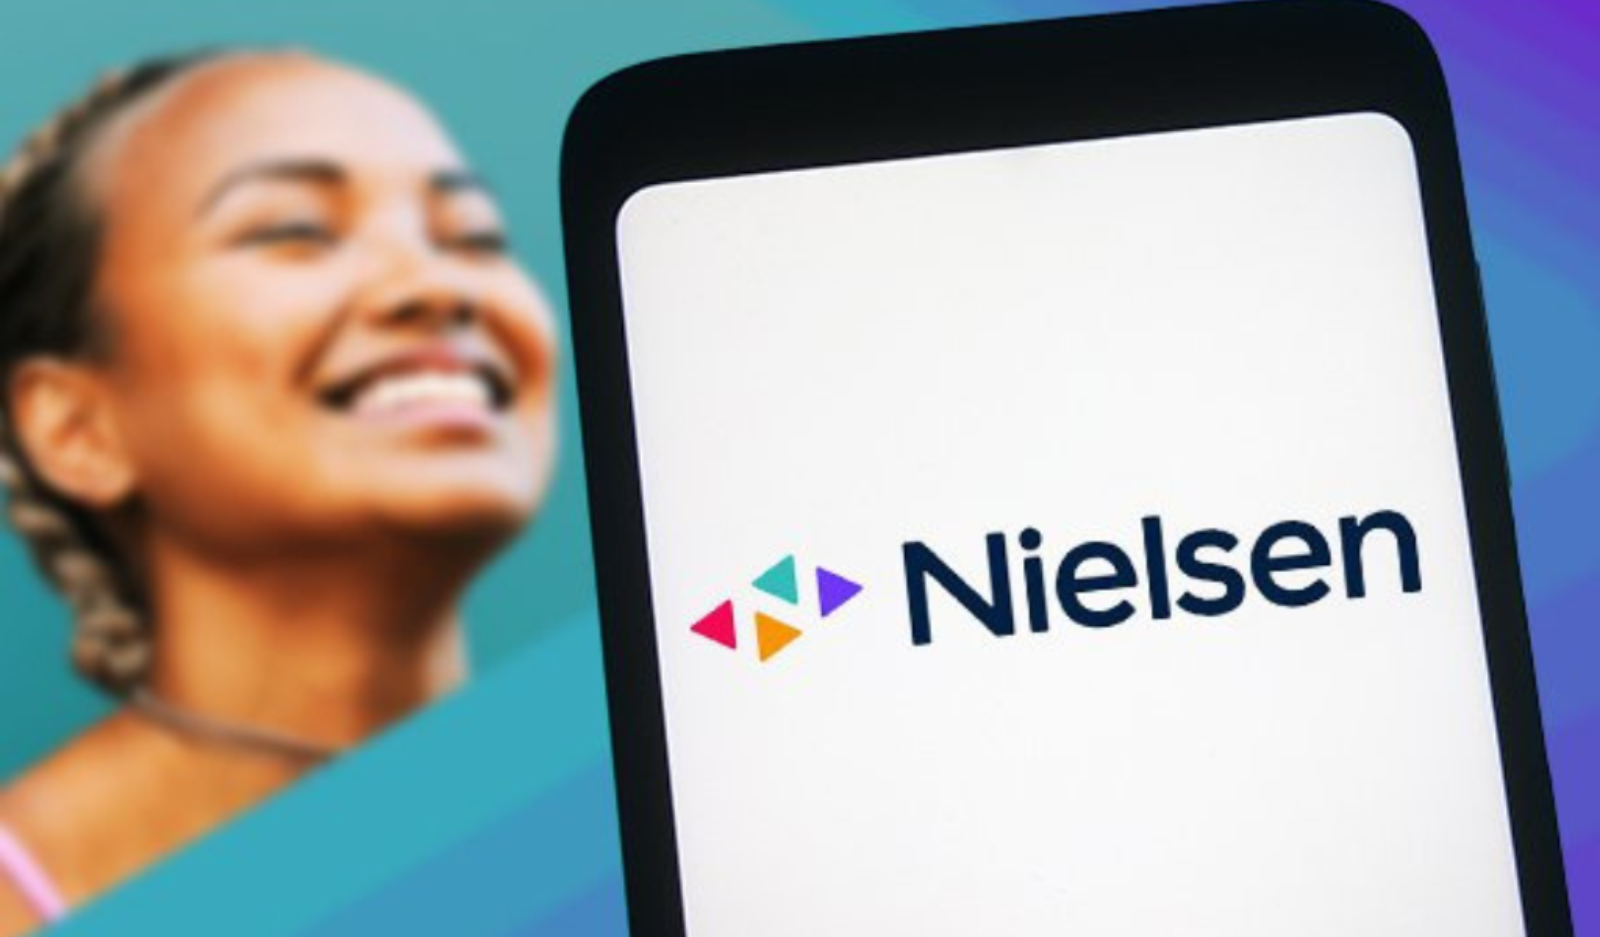 Is Measurement Giant Nielsen $16Bn Buyout A Hope For Turnaround?